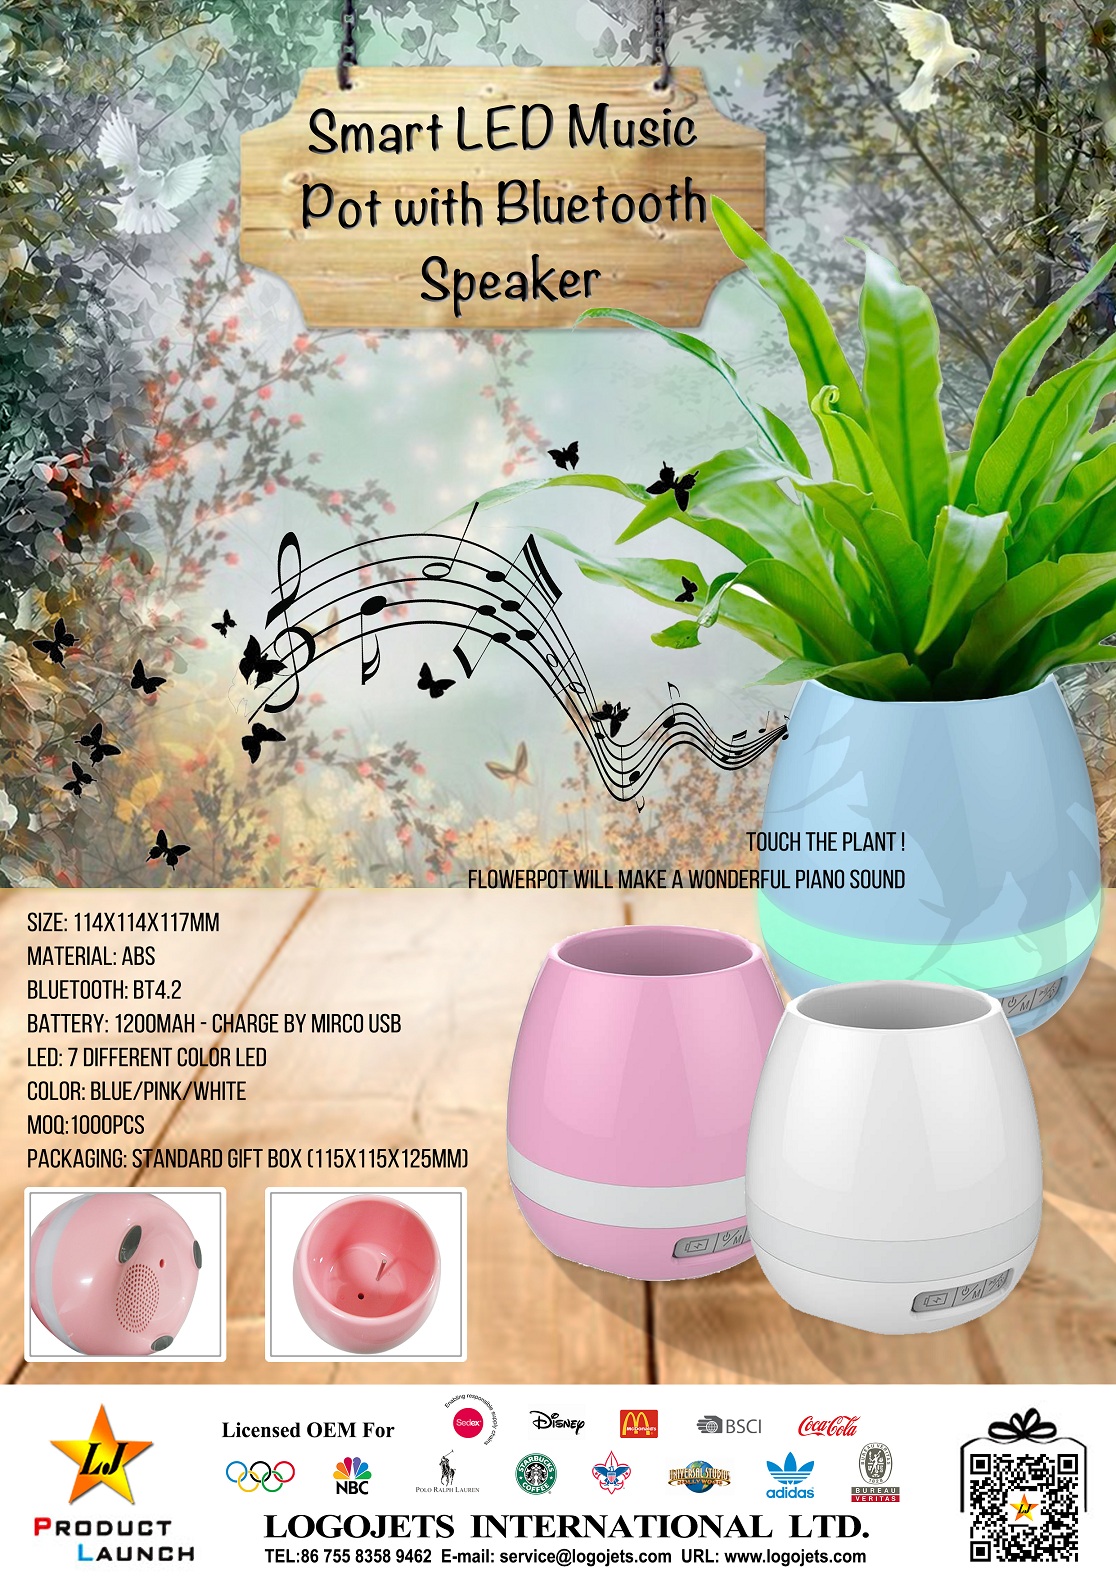 Smart LED Music Pot with Bluetooth Speaker